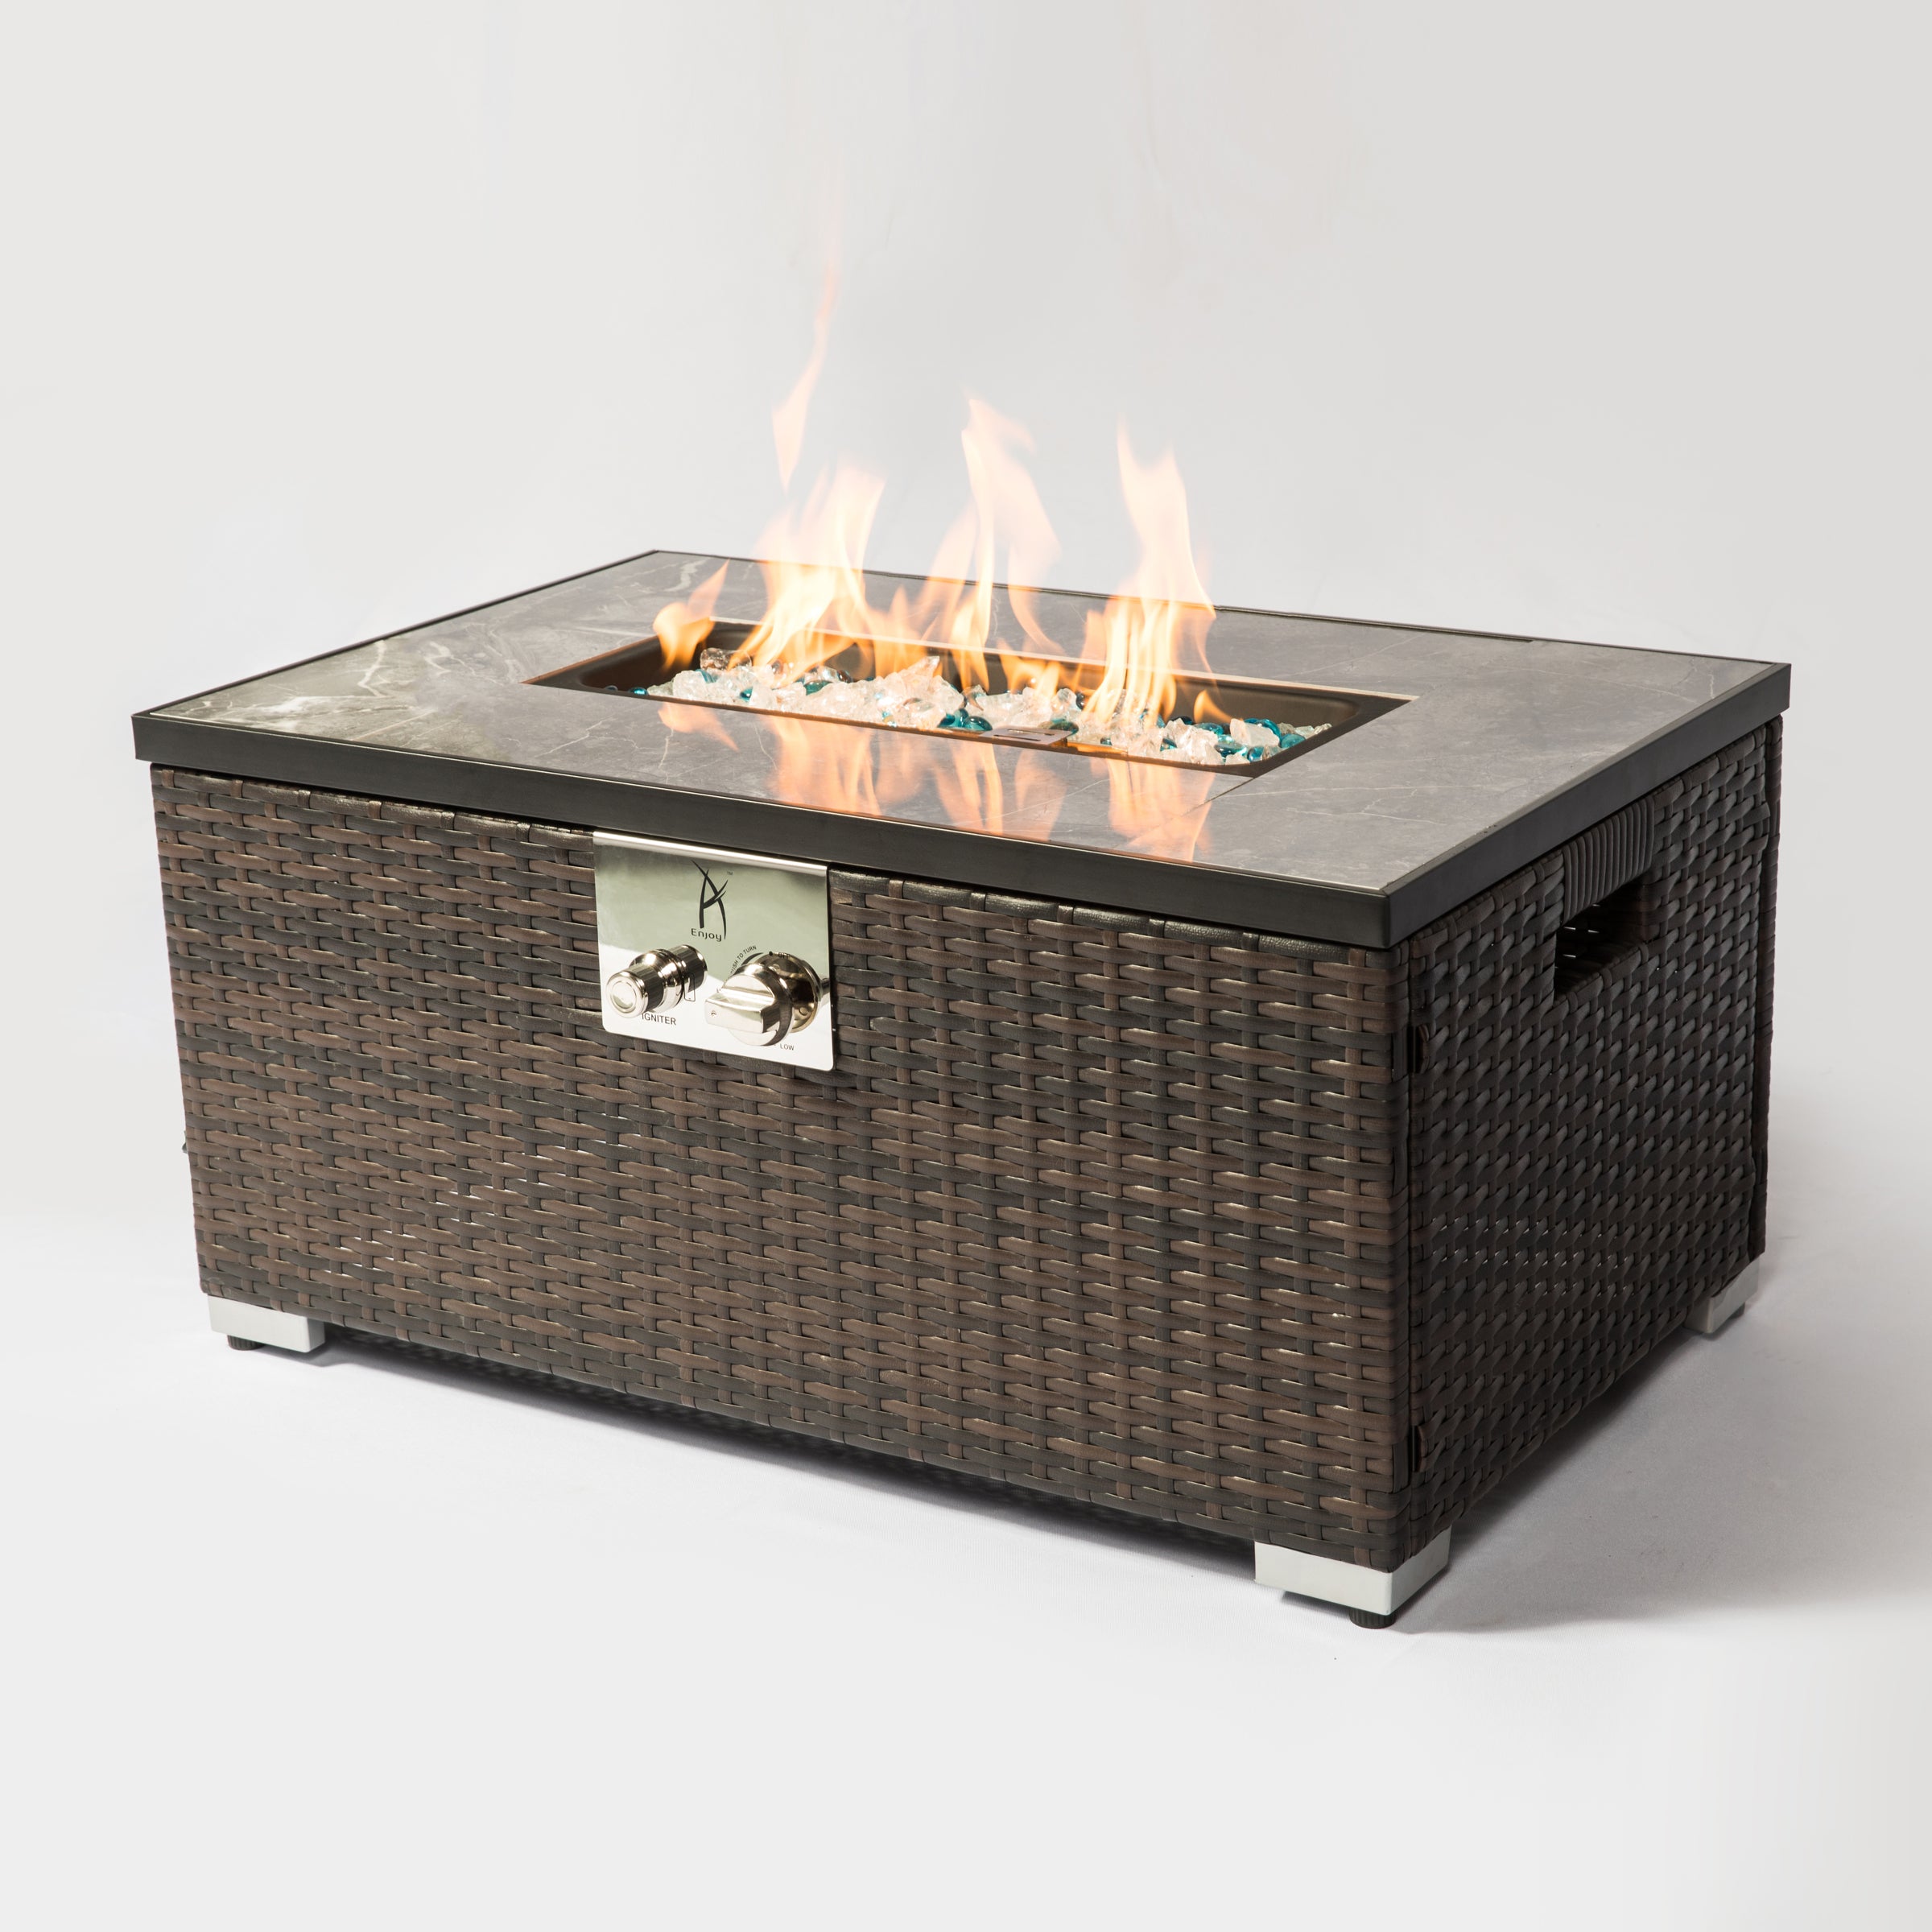 32inch Outdoor Fire Table Rectangle Gas Fire Pit with Glass Stones in Mixing Colors and Metal Cover-Boyel Living